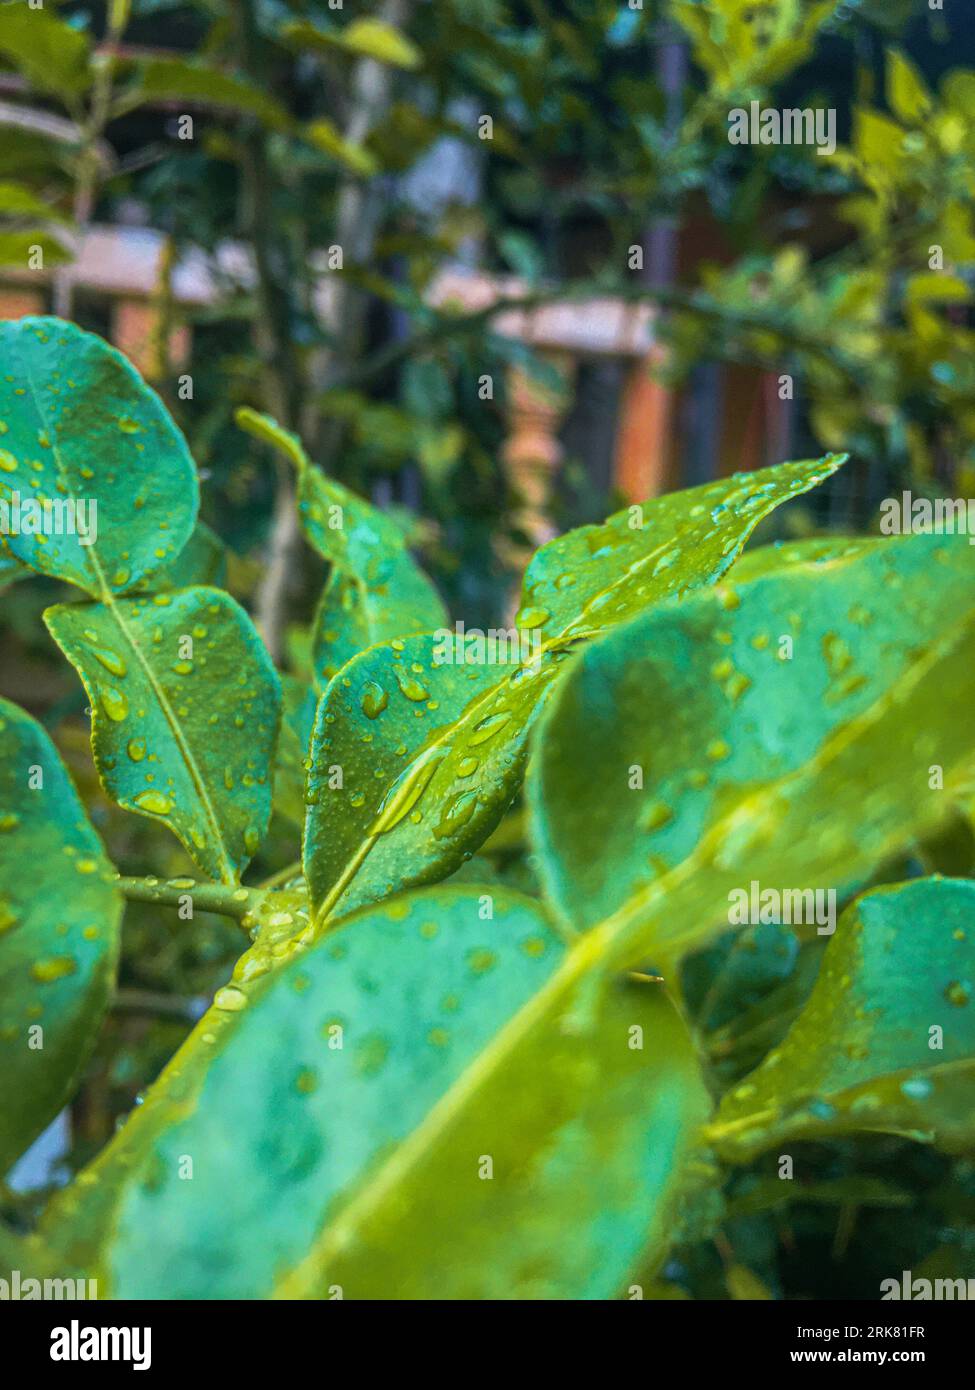 Some vibrant green leaves dotted with dew droplets Stock Photo